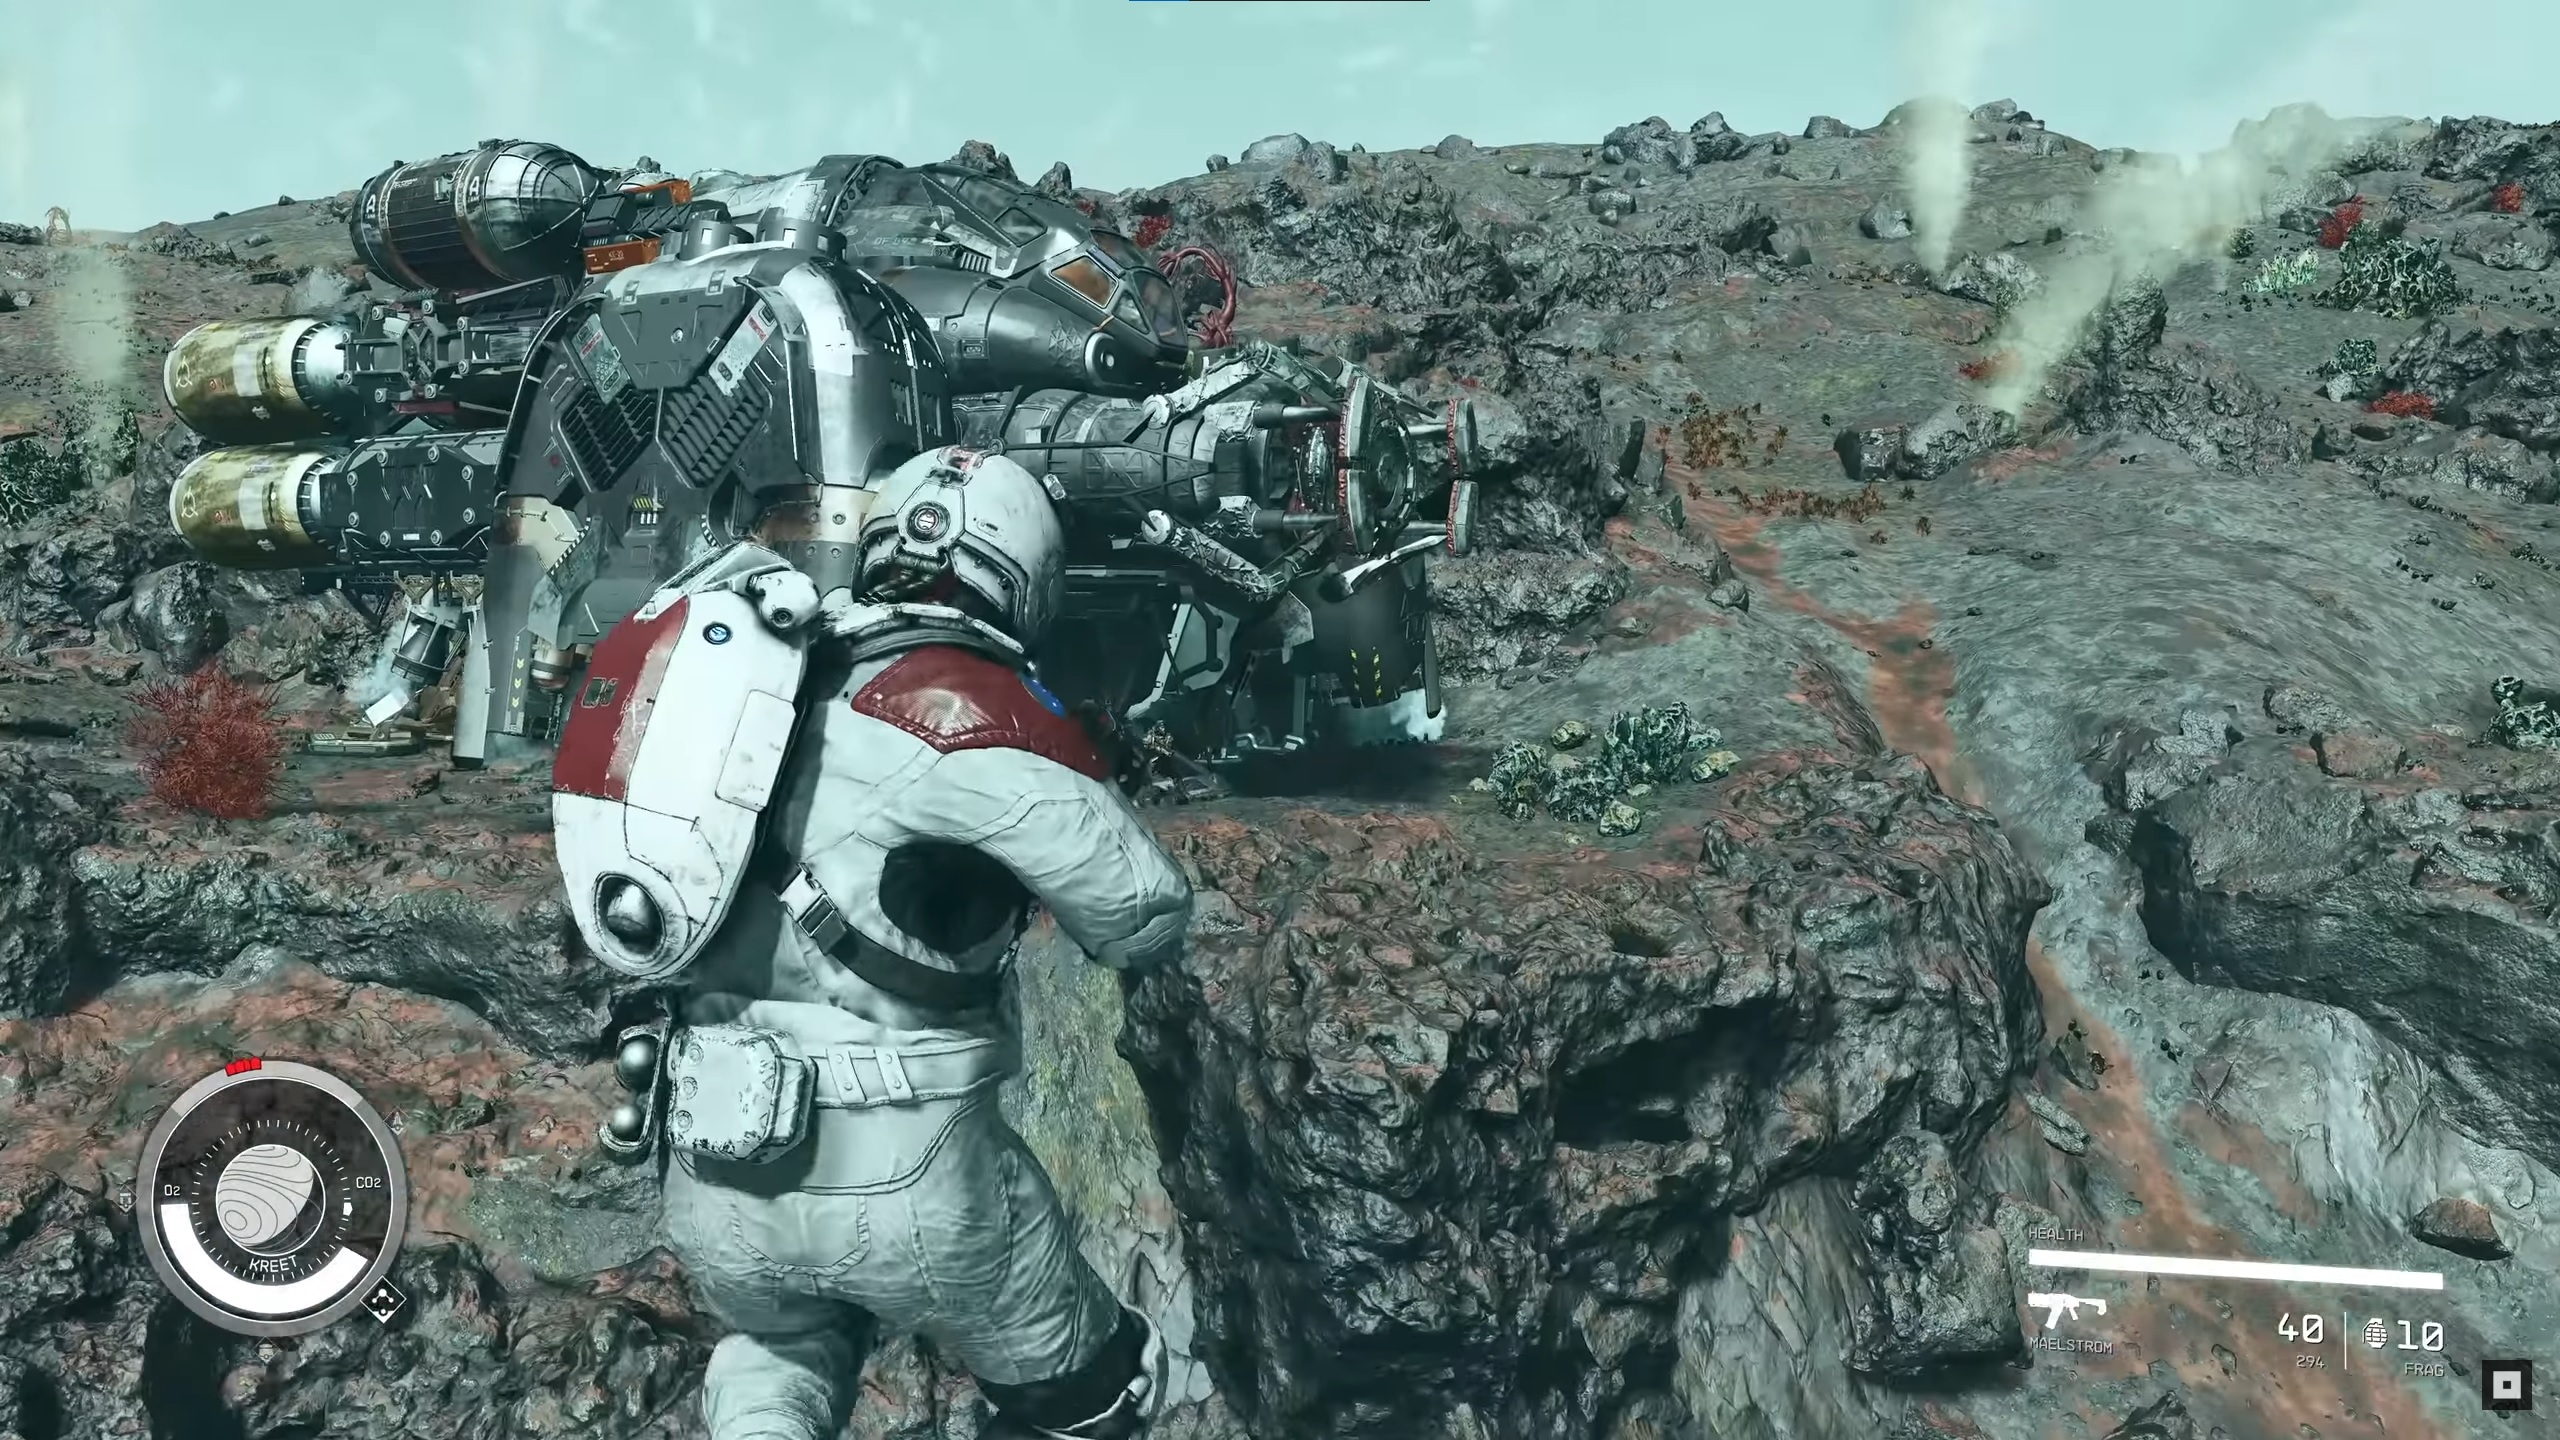 Starfield - A player in a white space suit jumps in the air holding a gun pointing at a Crimson Fleet space ship, a clunky machine with grey parts and gold plated thrusters on back.